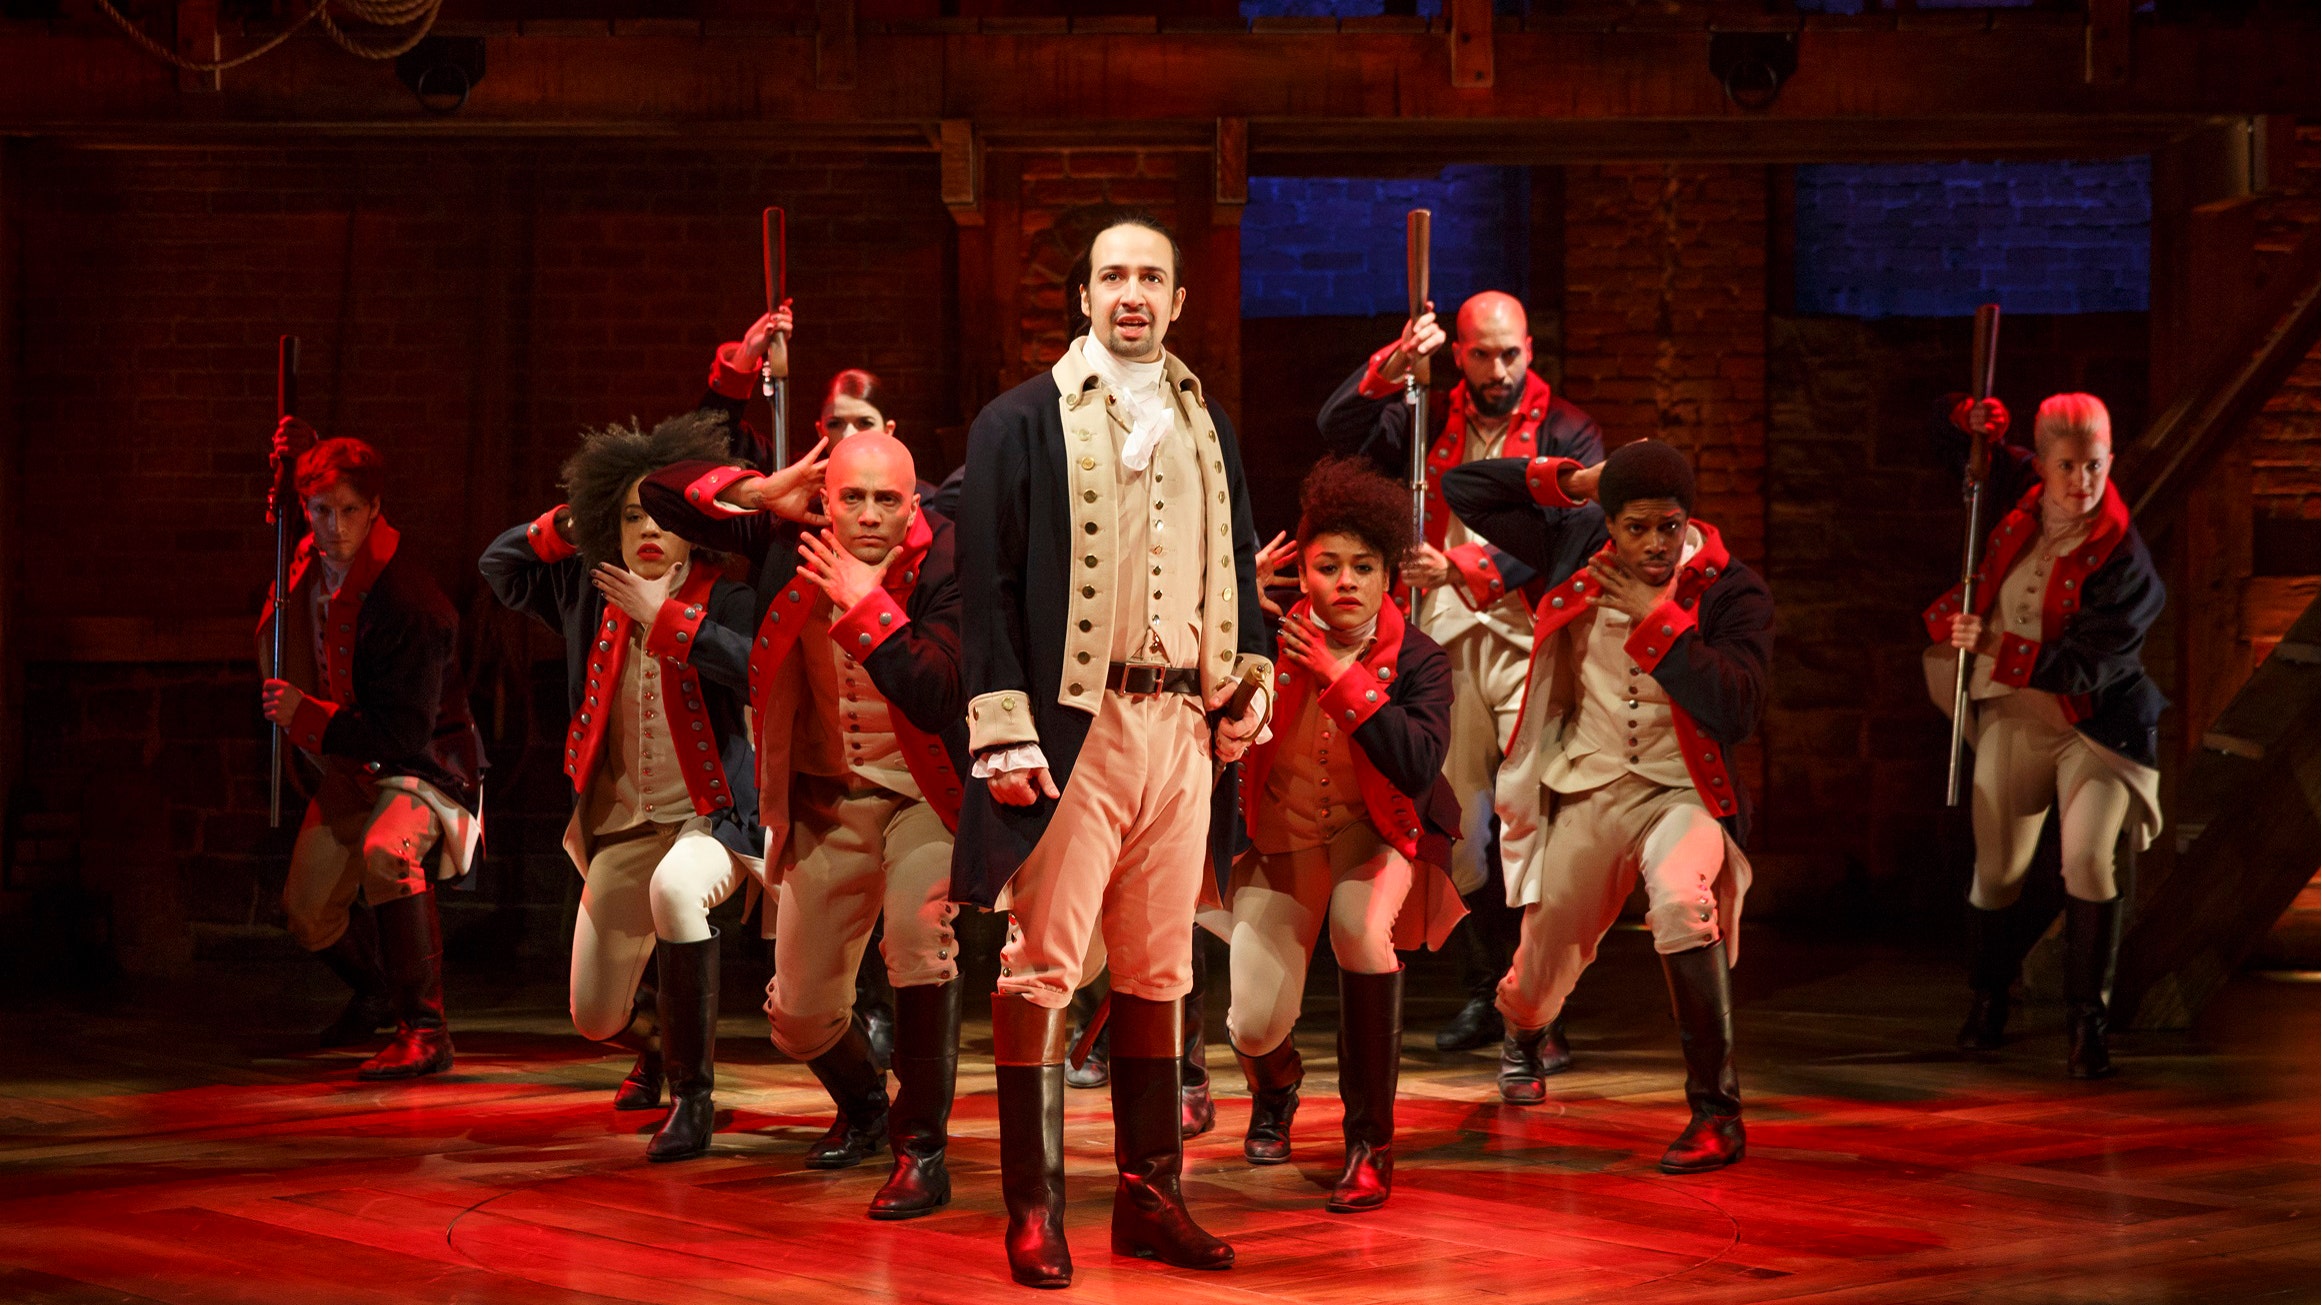 Texas church to pay damages for unauthorized 'Hamilton' production that added religious themes